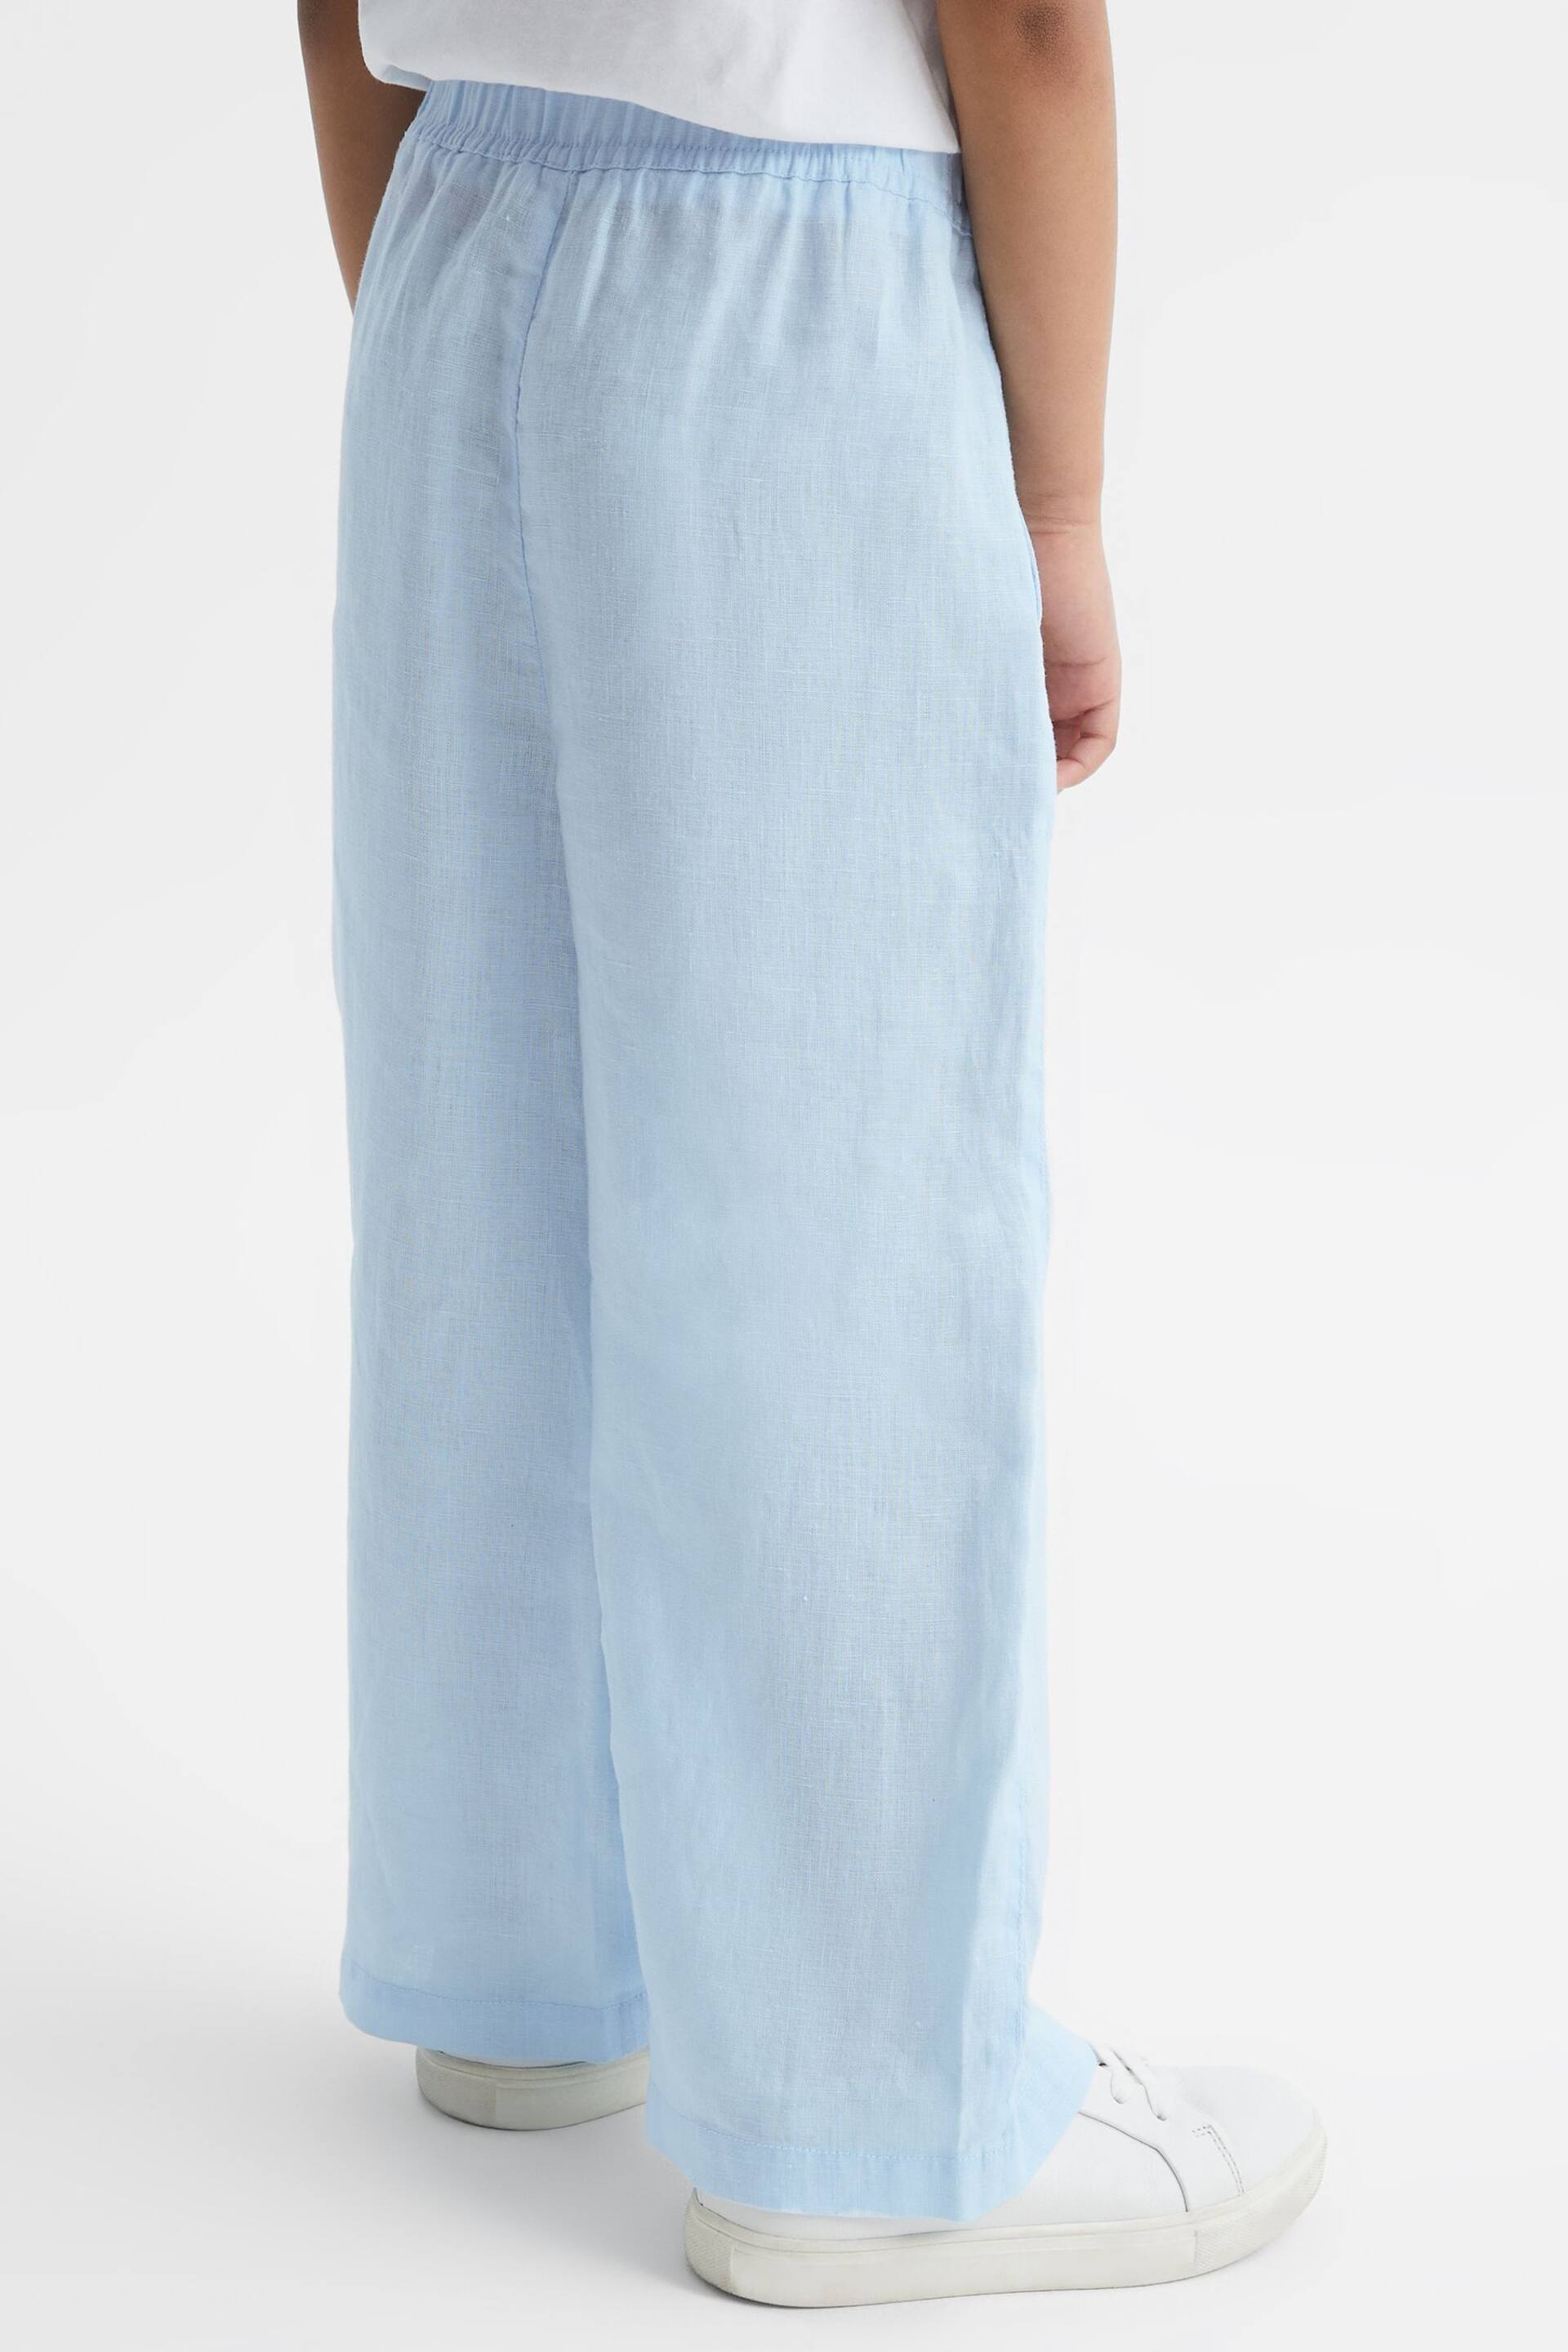 Reiss Ice Blue Cleo Junior Linen Drawstring Trousers - Image 5 of 6